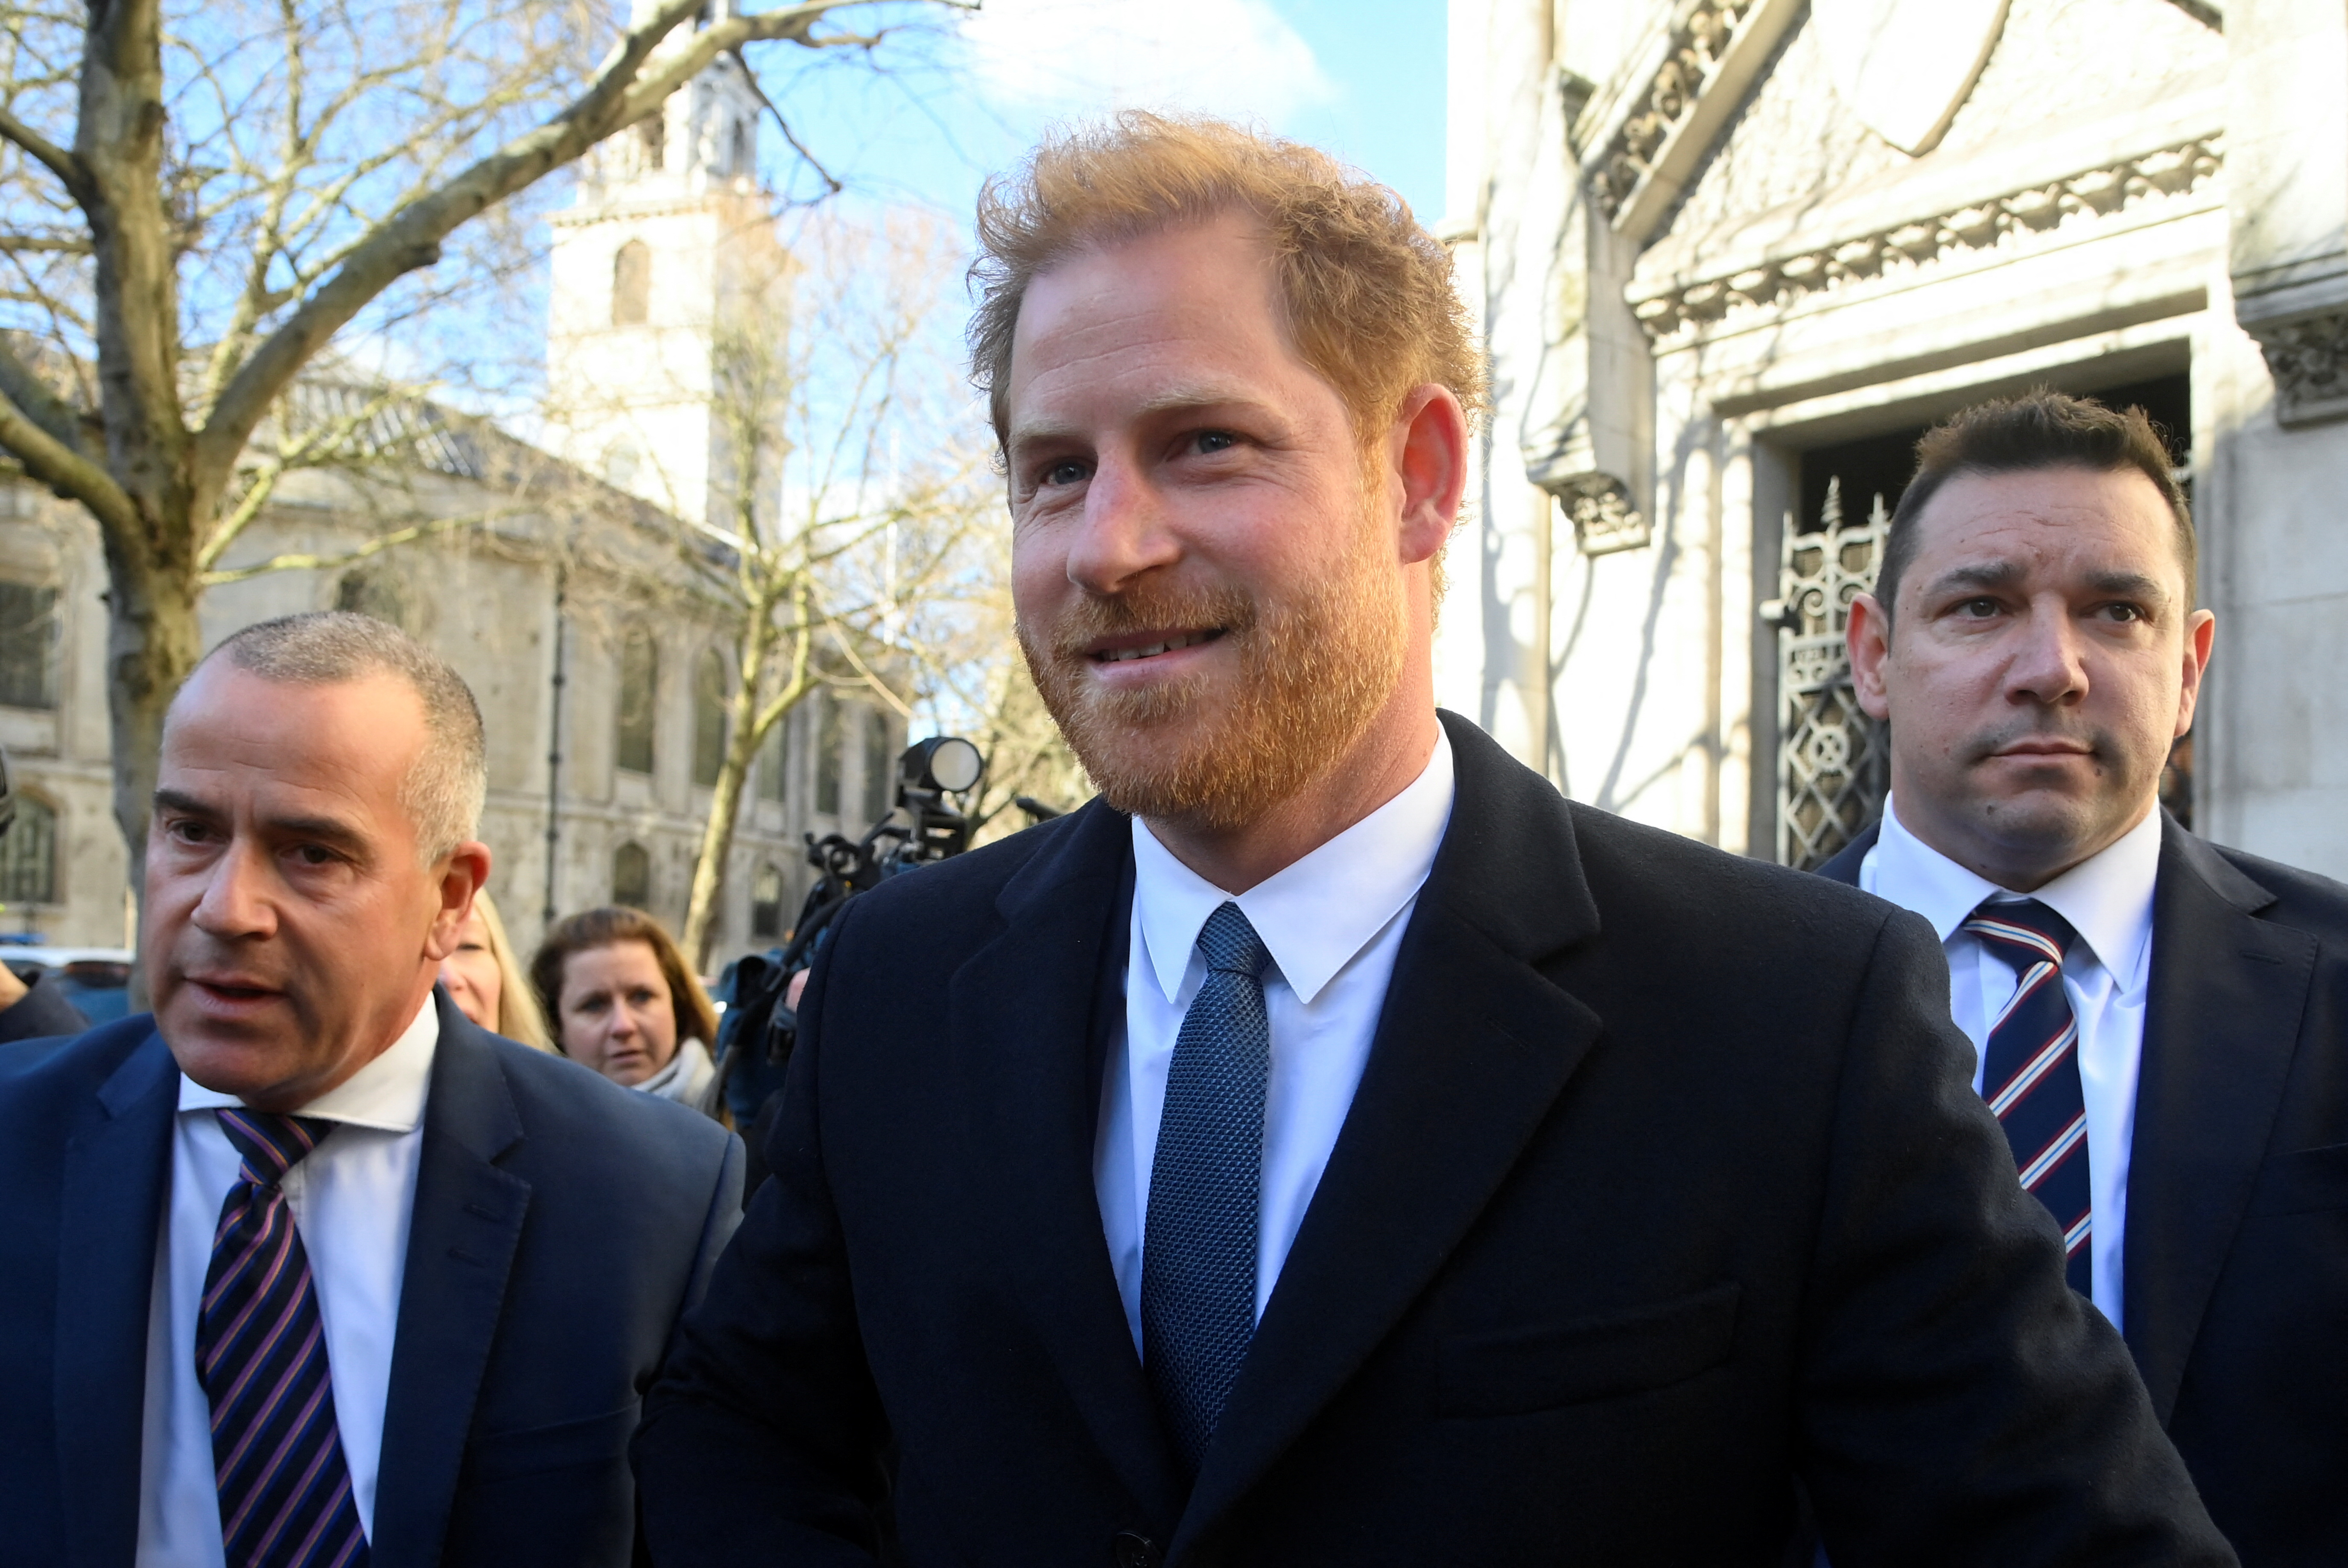 Britain's Prince Harry, Duke of Sussex, arrives at the High Court in London, Britain March 27, 2023. REUTERS/Toby Melville